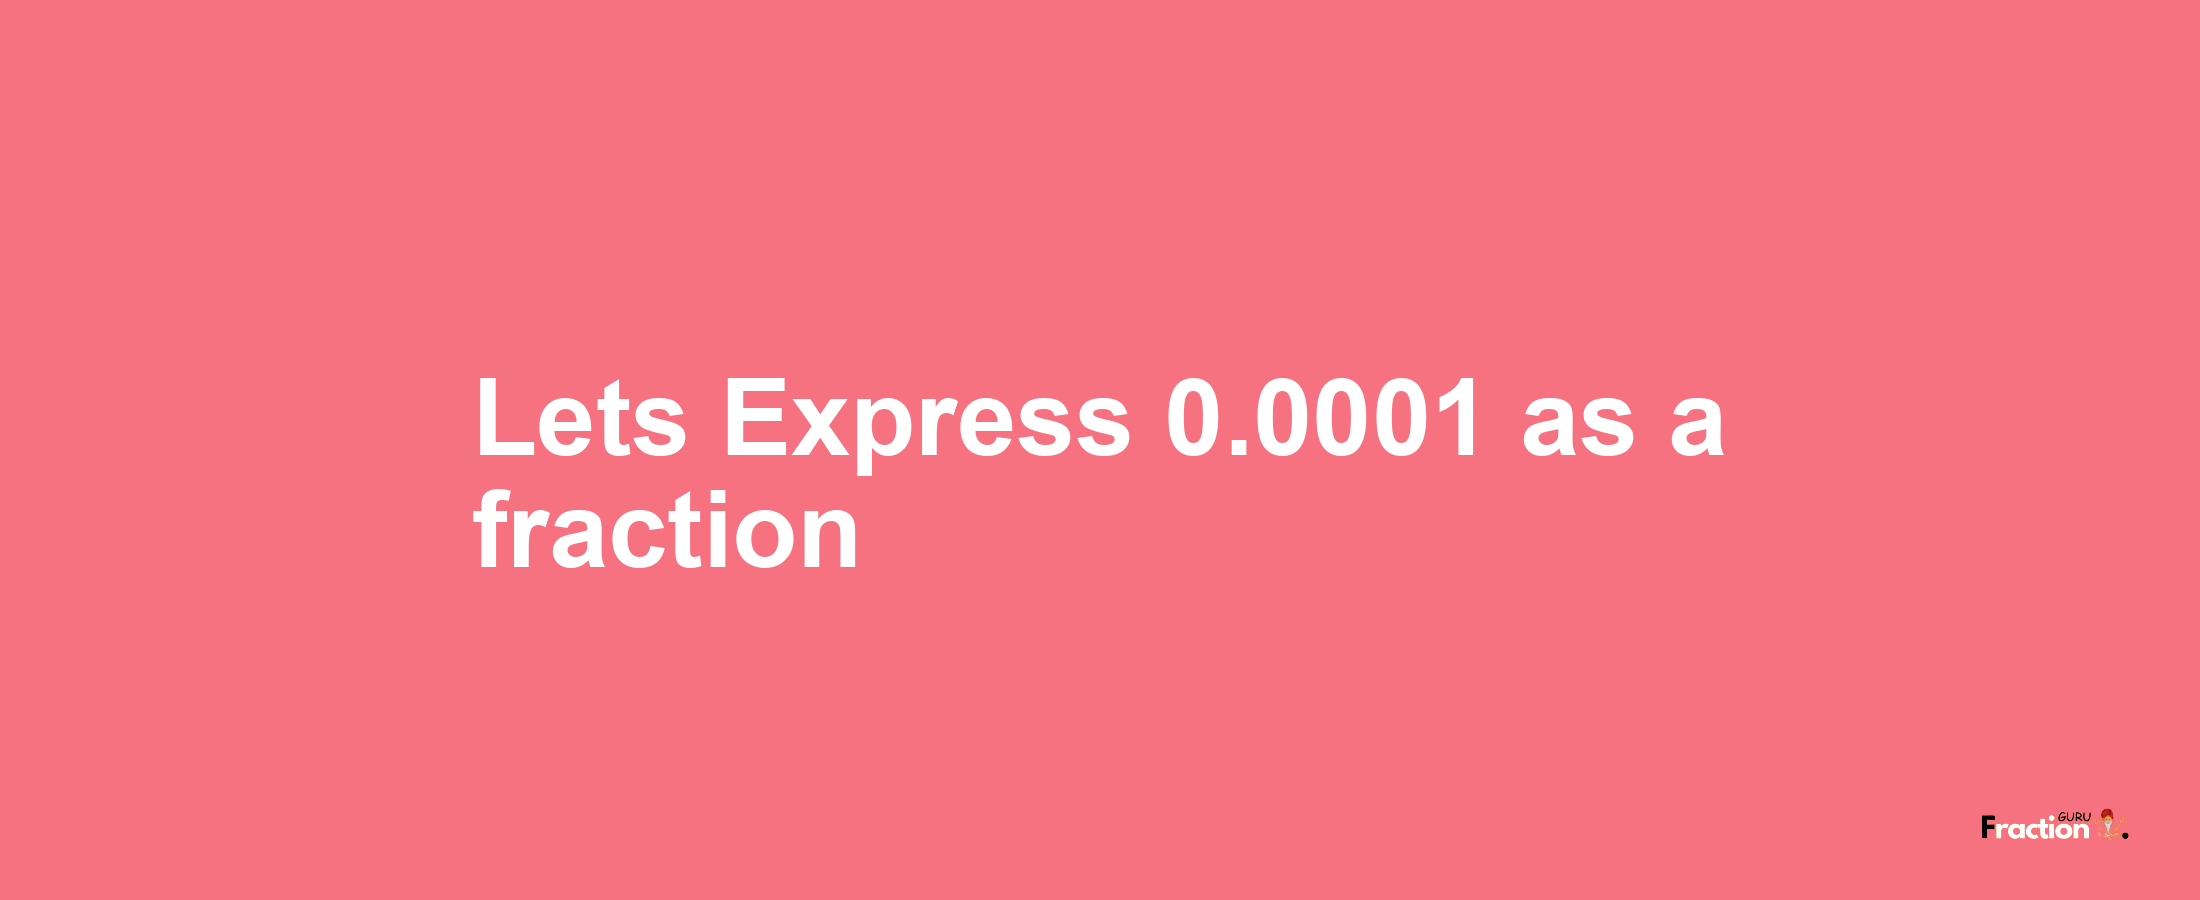 Lets Express 0.0001 as afraction